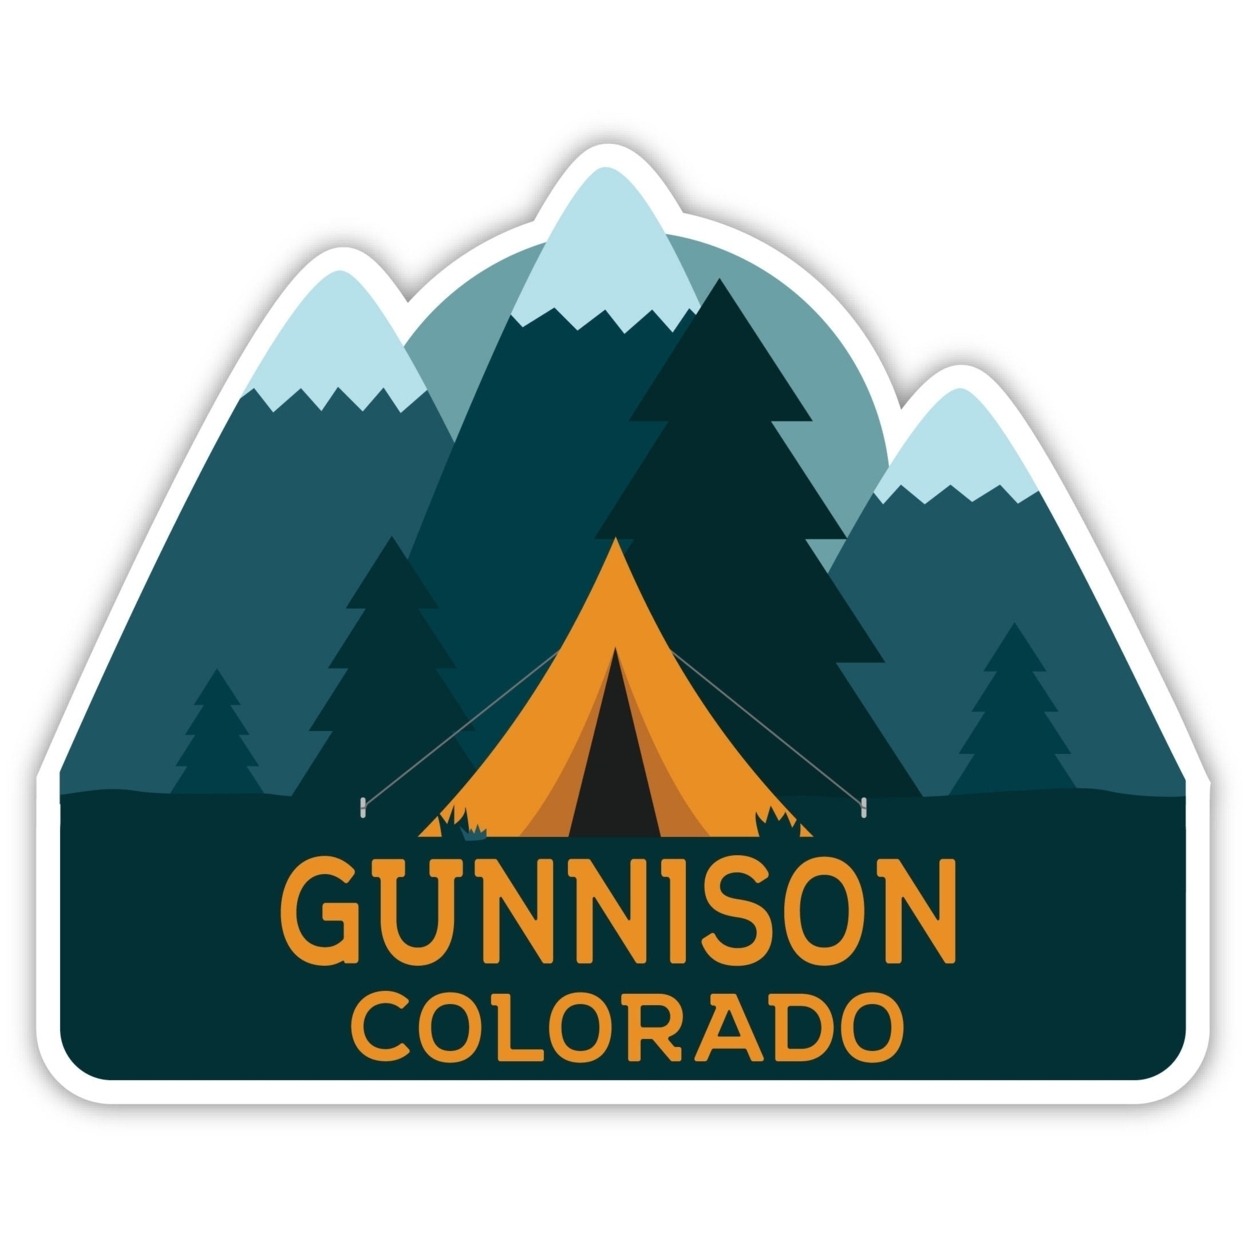 Gunnison Colorado Souvenir Decorative Stickers (Choose Theme And Size) - 4-Pack, 4-Inch, Great Outdoors